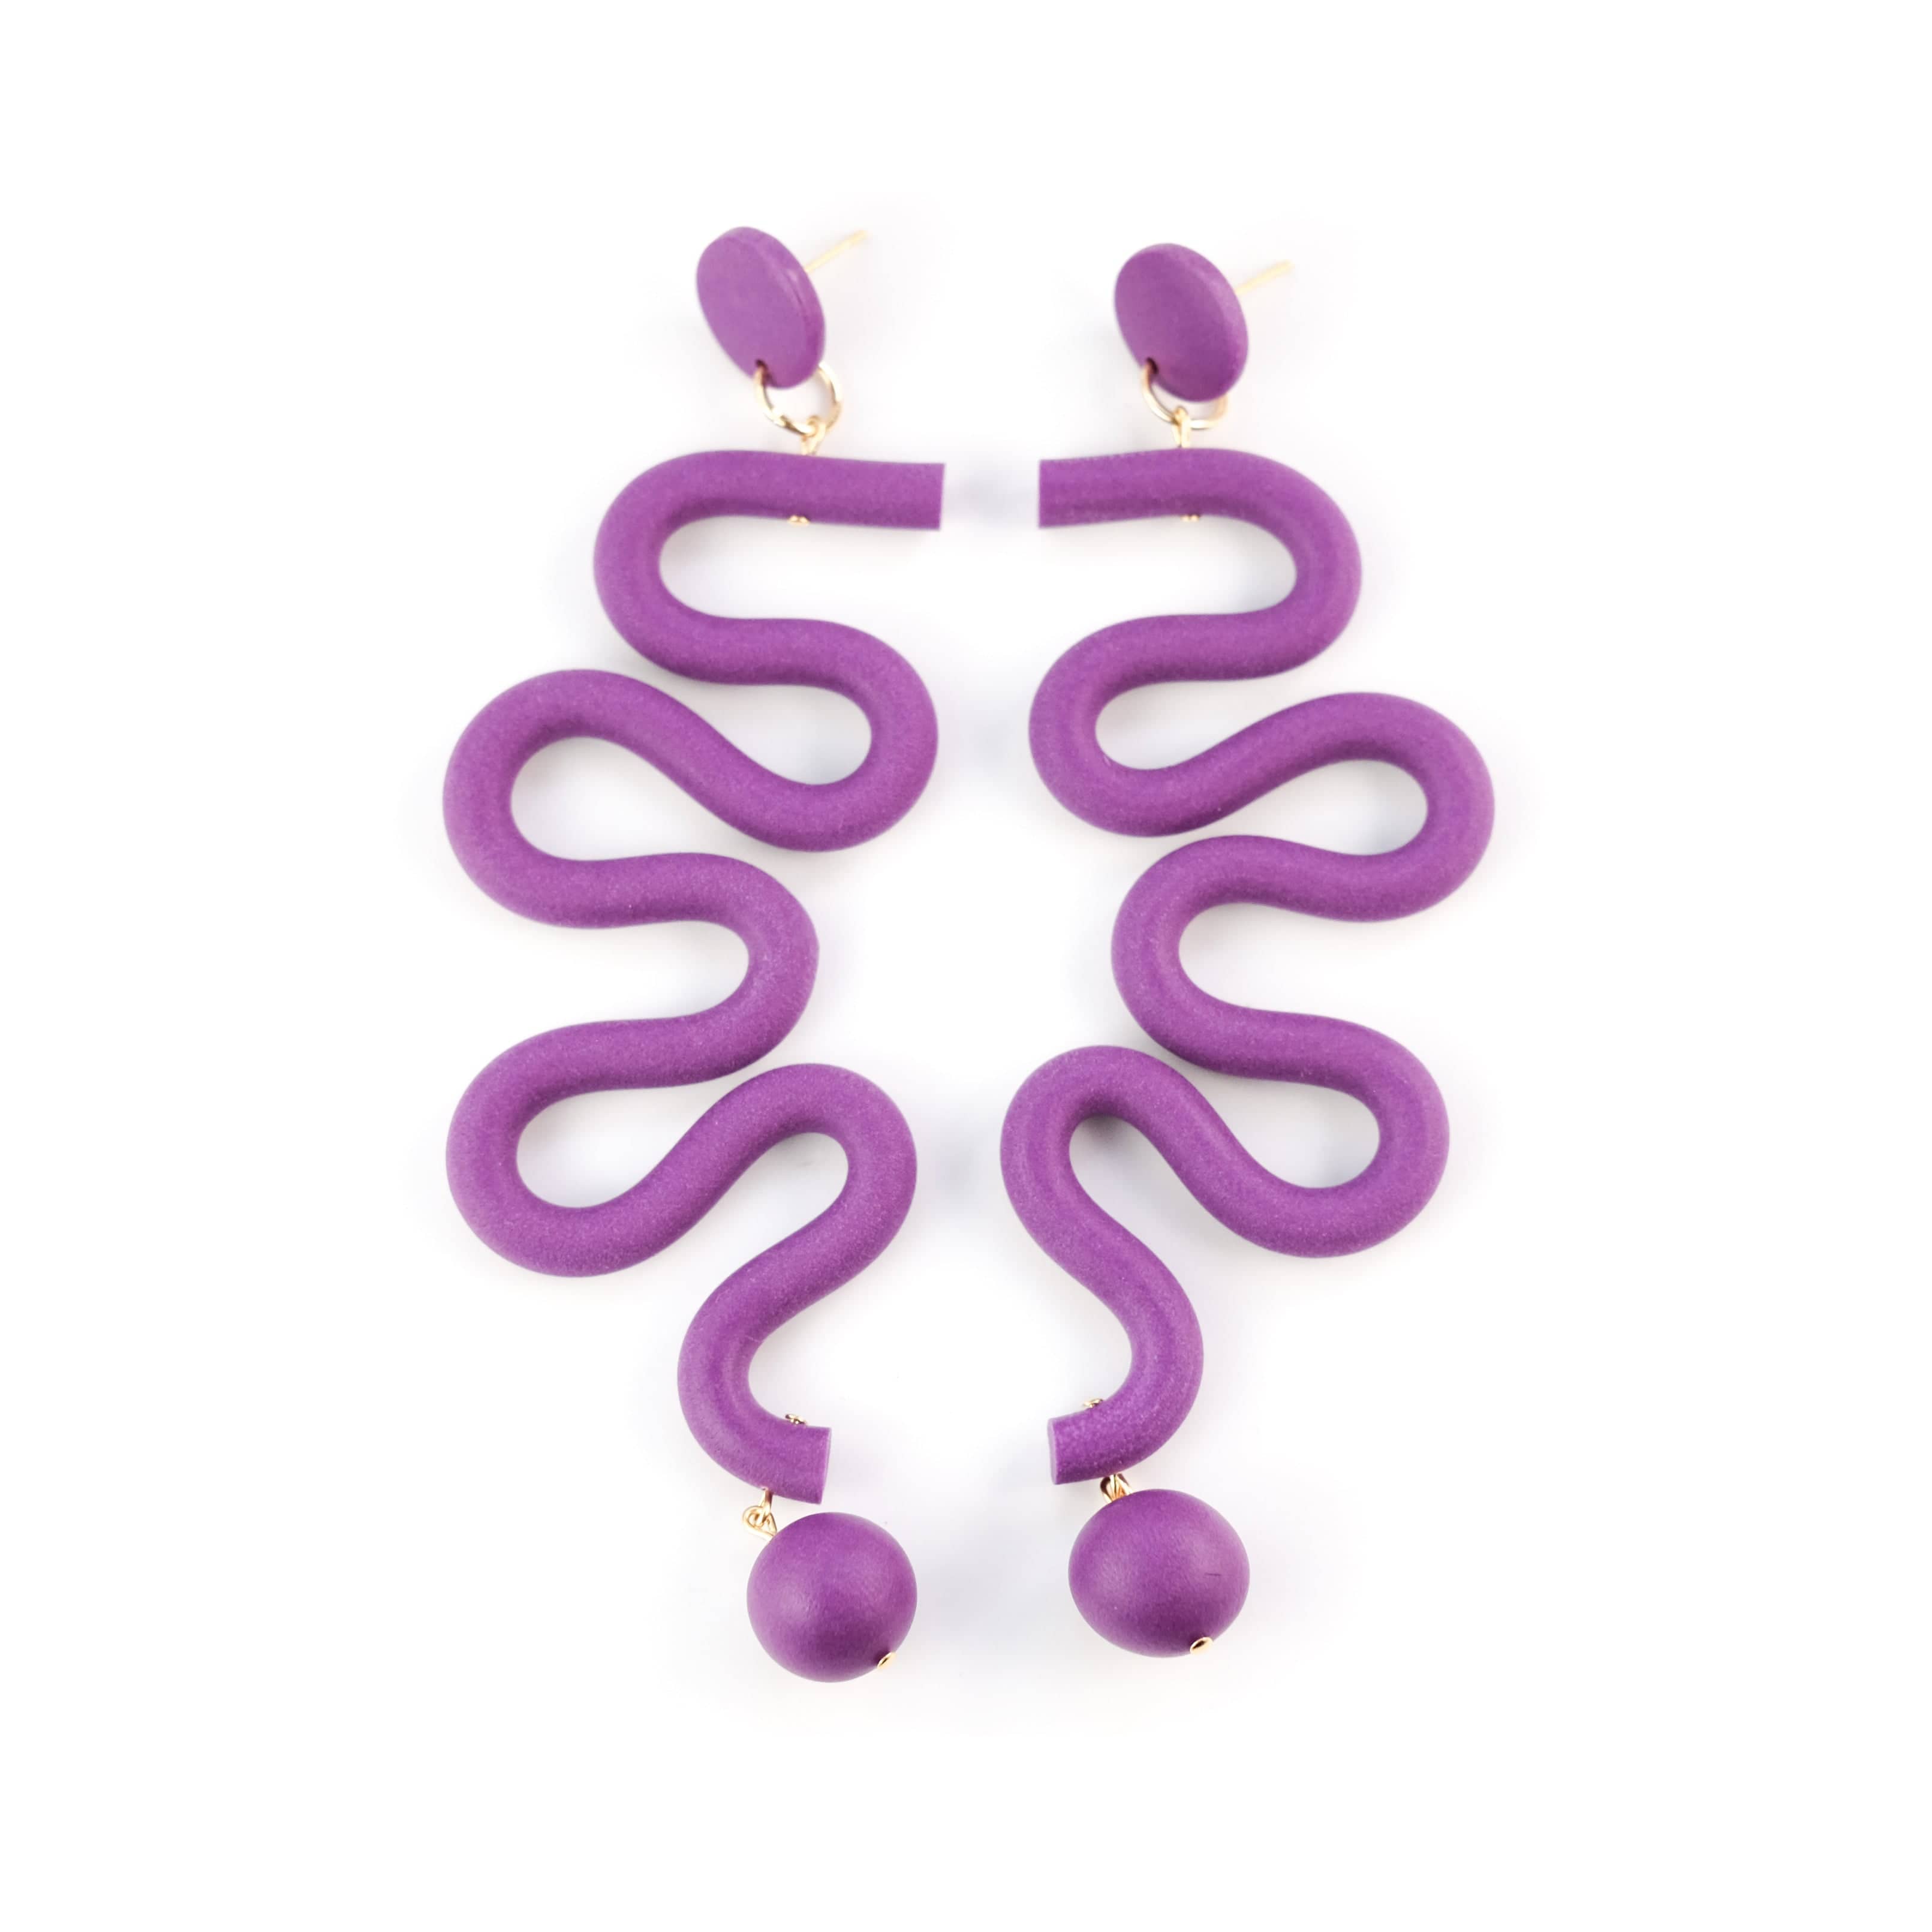 By Chavelli Women's Pink / Purple Tube Squiggles Dangly Statement Earrings In Deep Purple